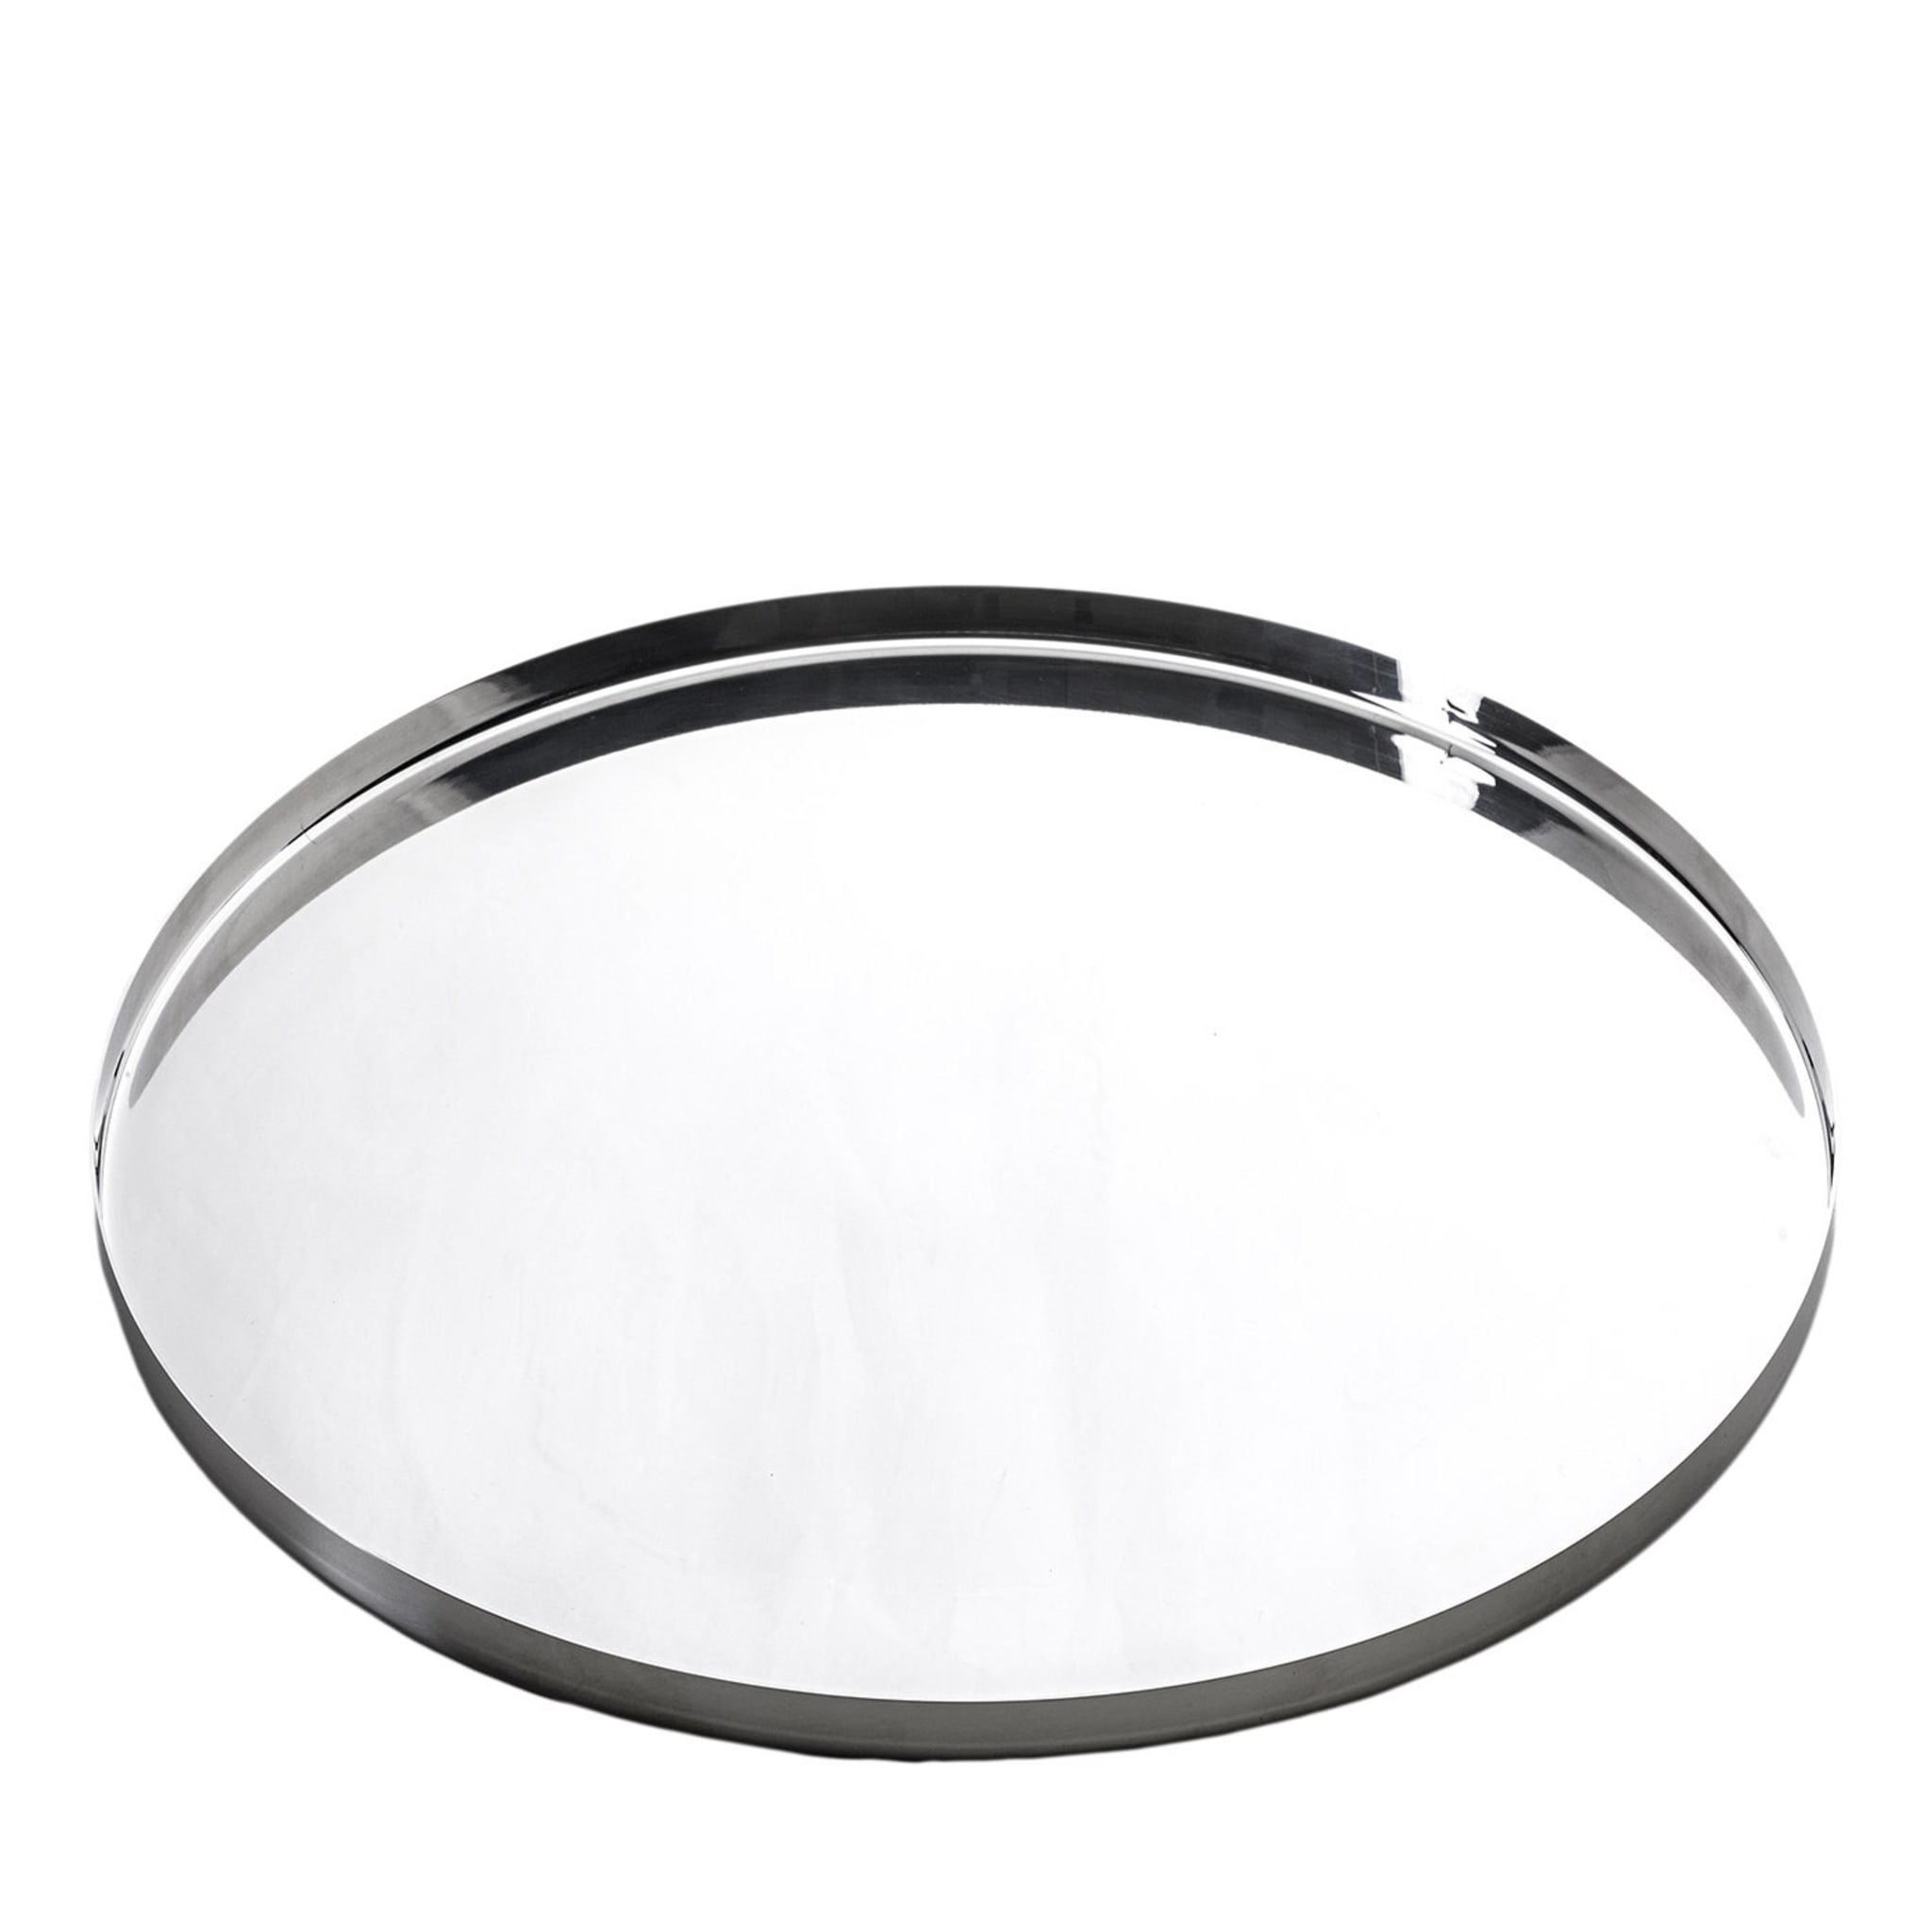 Stile Round Stainless Steel Tray - Main view